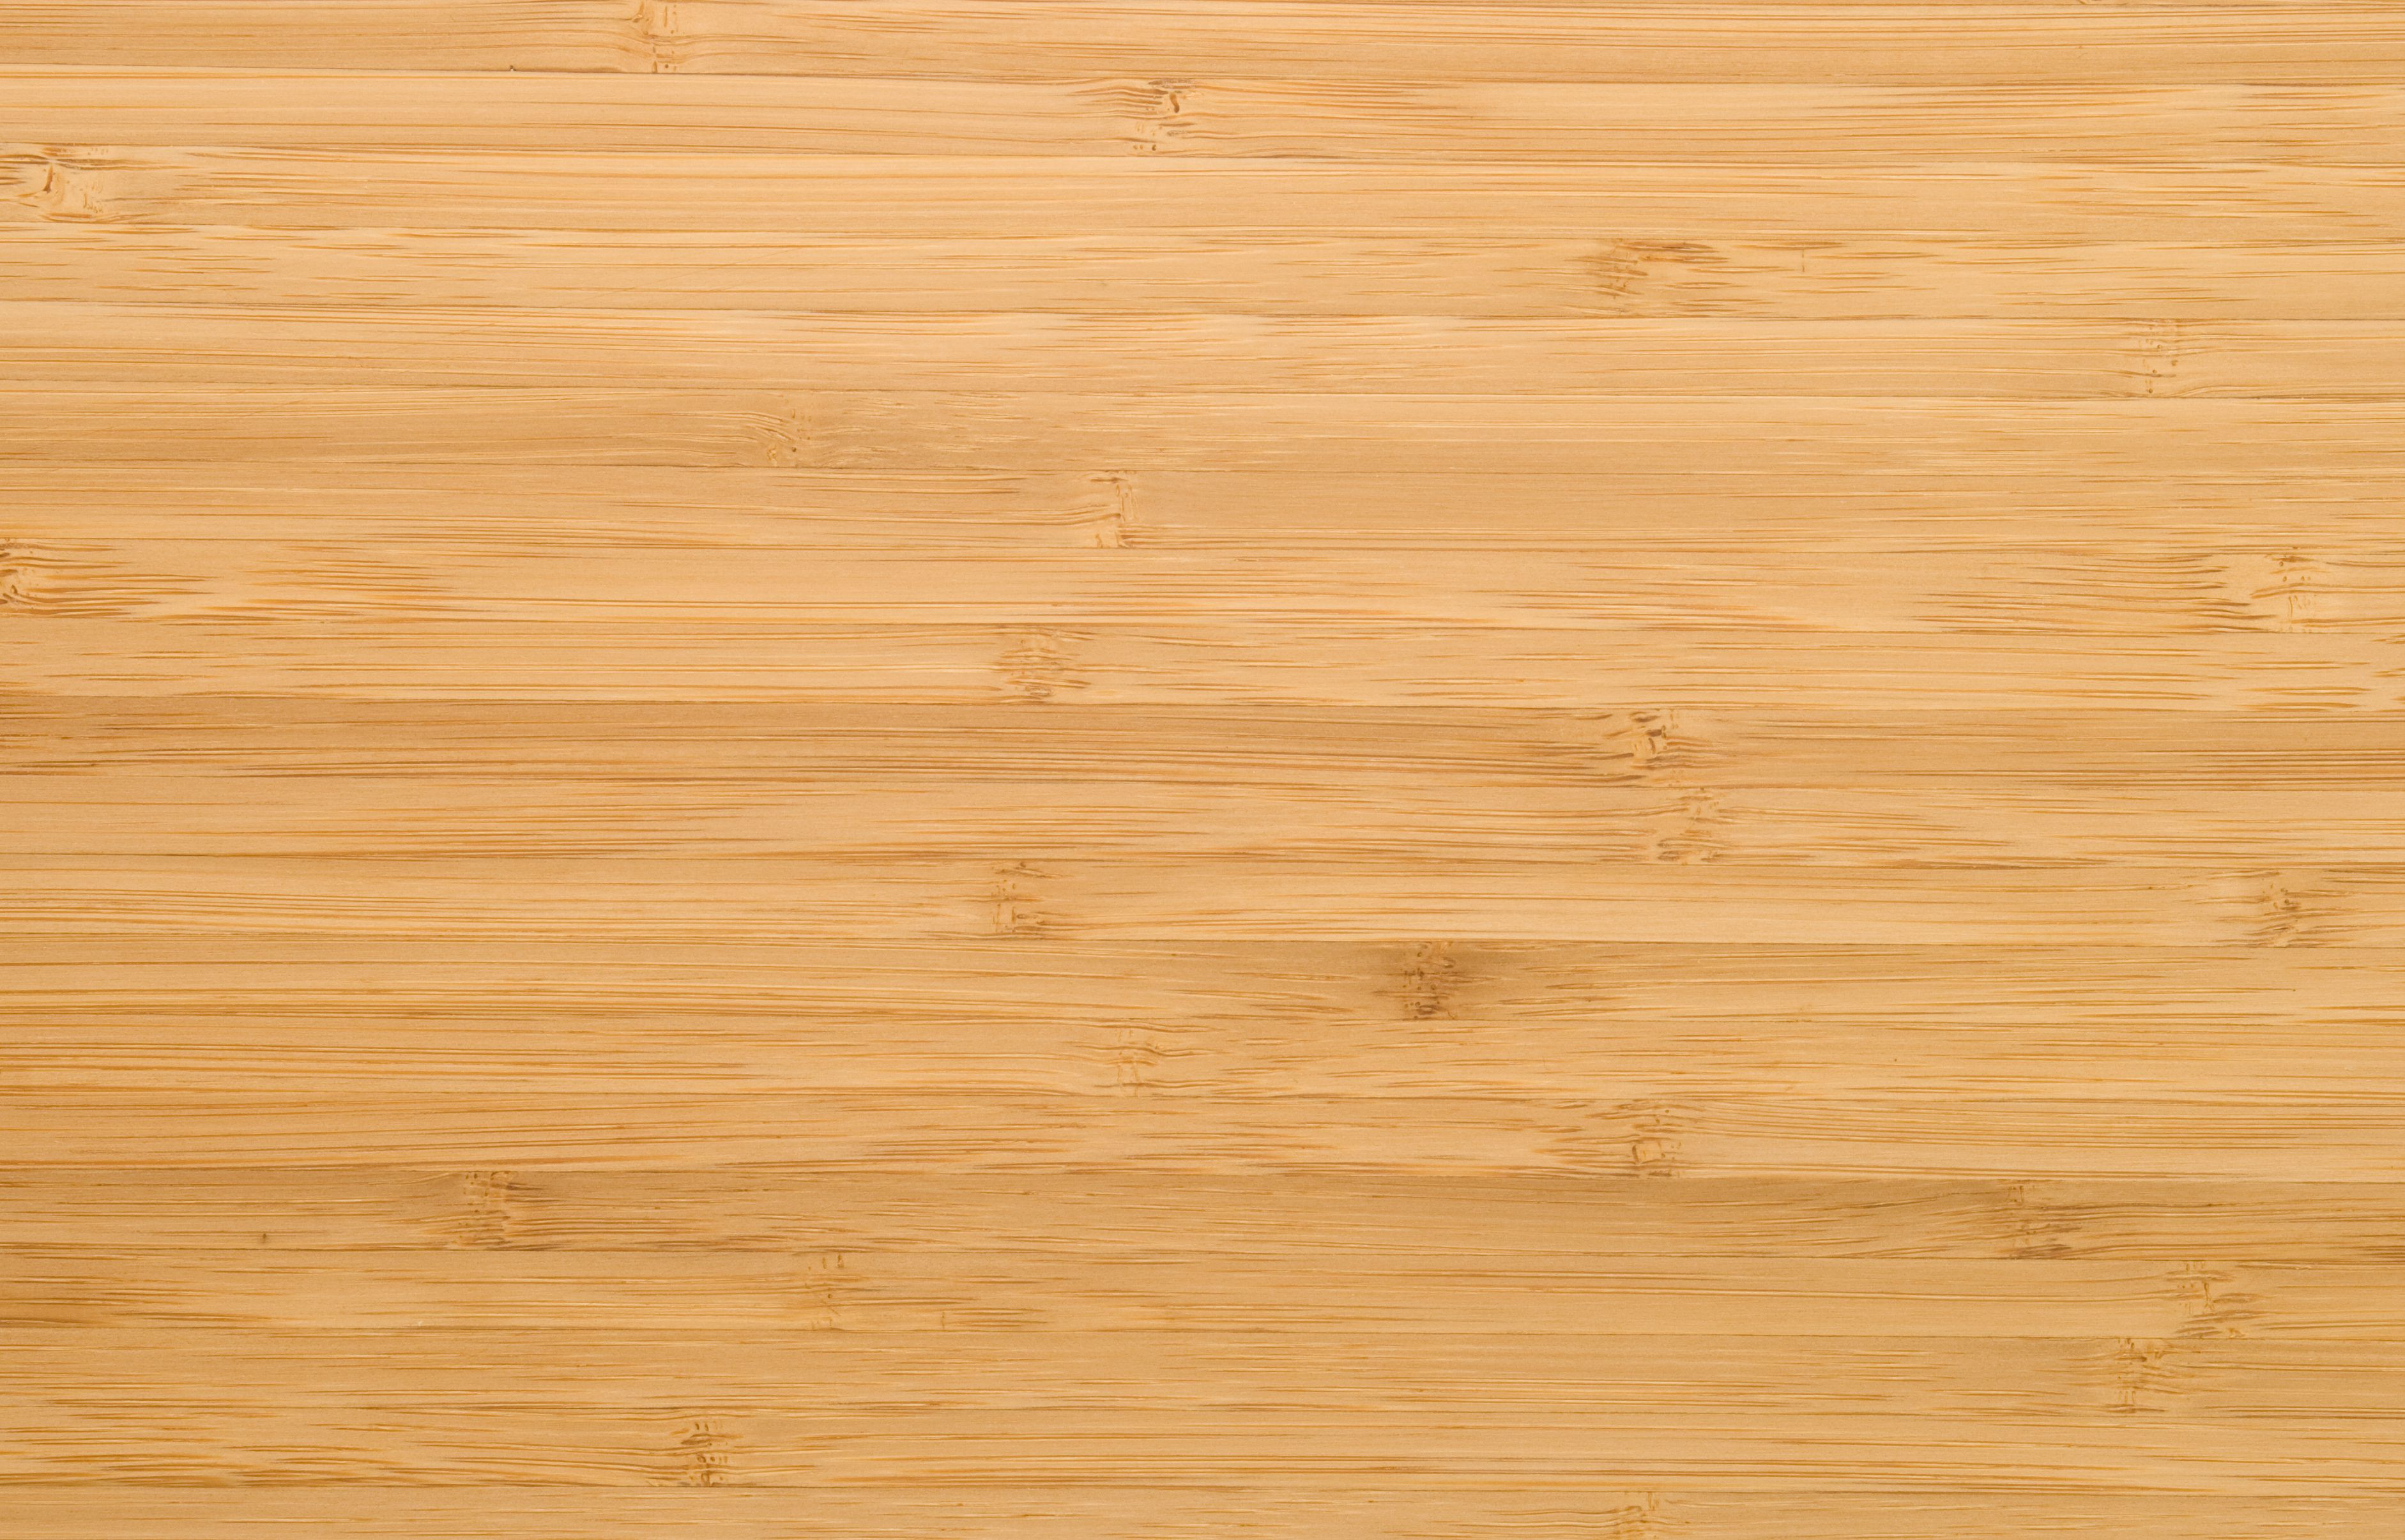 14 Unique How Good is Bamboo Hardwood Flooring 2024 free download how good is bamboo hardwood flooring of can you use a wet mop on bamboo floors in natural bamboo plank 94259870 59aeefd4519de20010d5c648